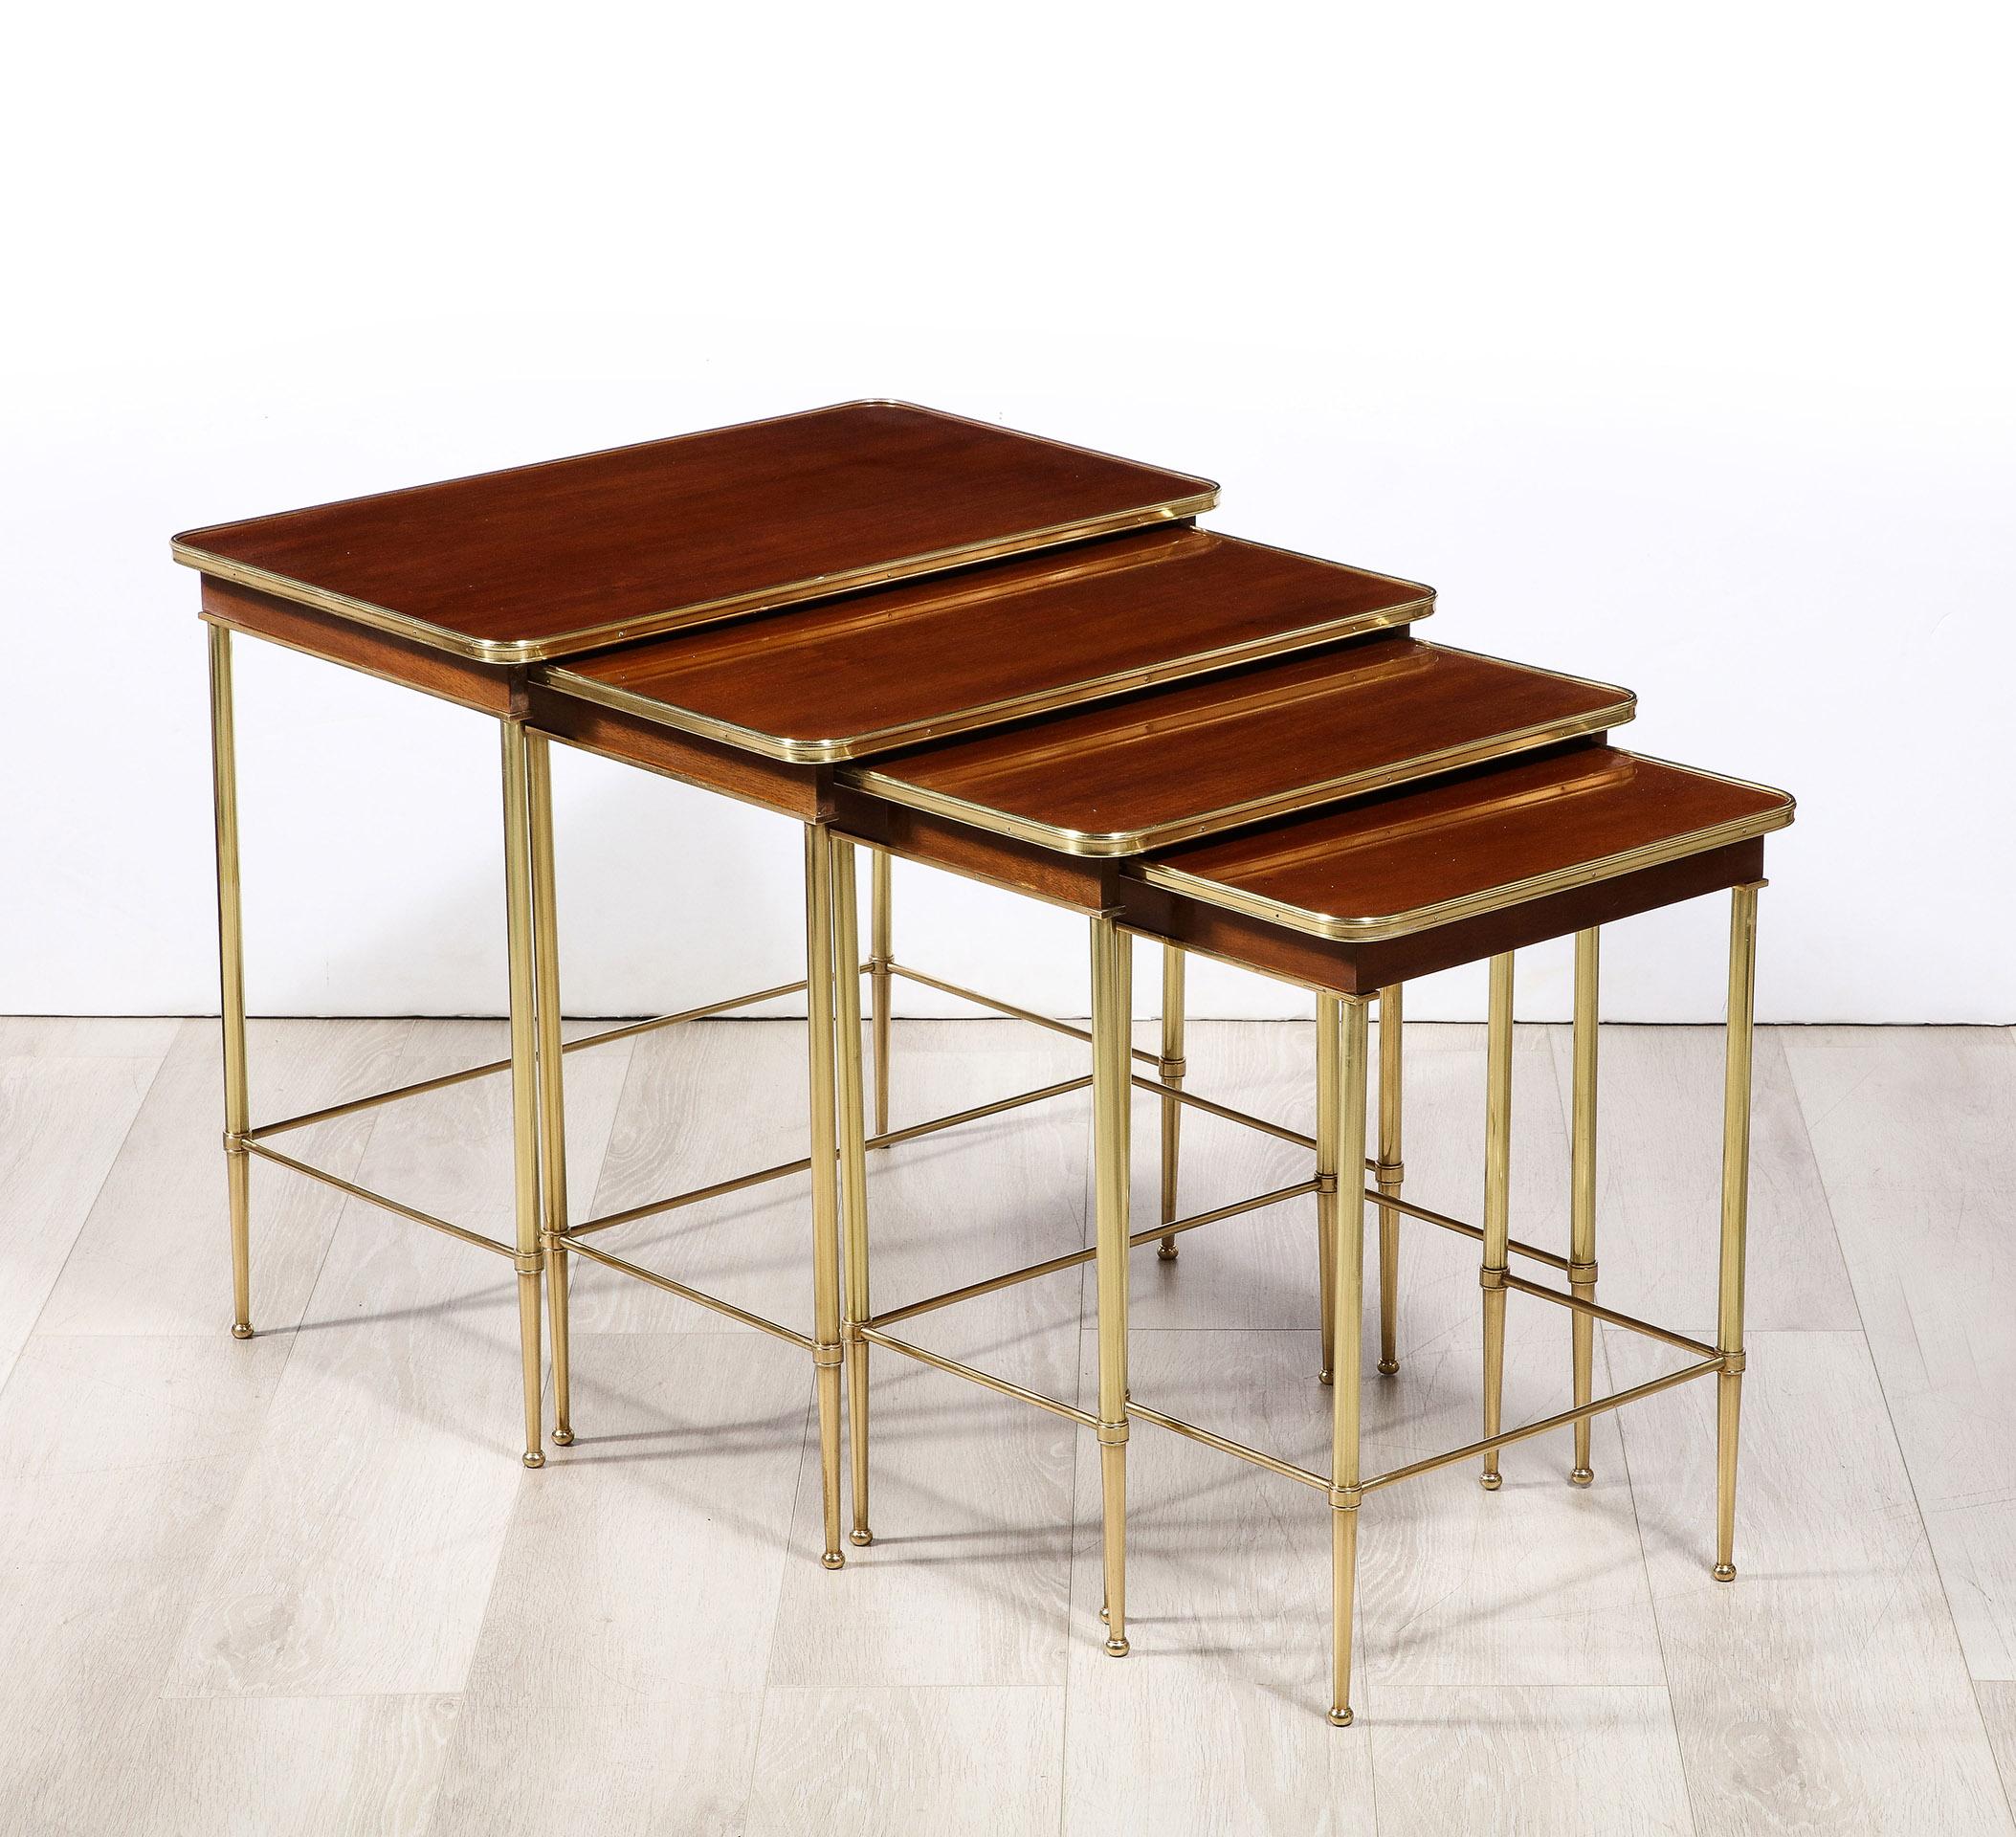 The set of 4 tables having a brass framed mahogany top and mahogany sides on brass legs and each stamped Jansen.